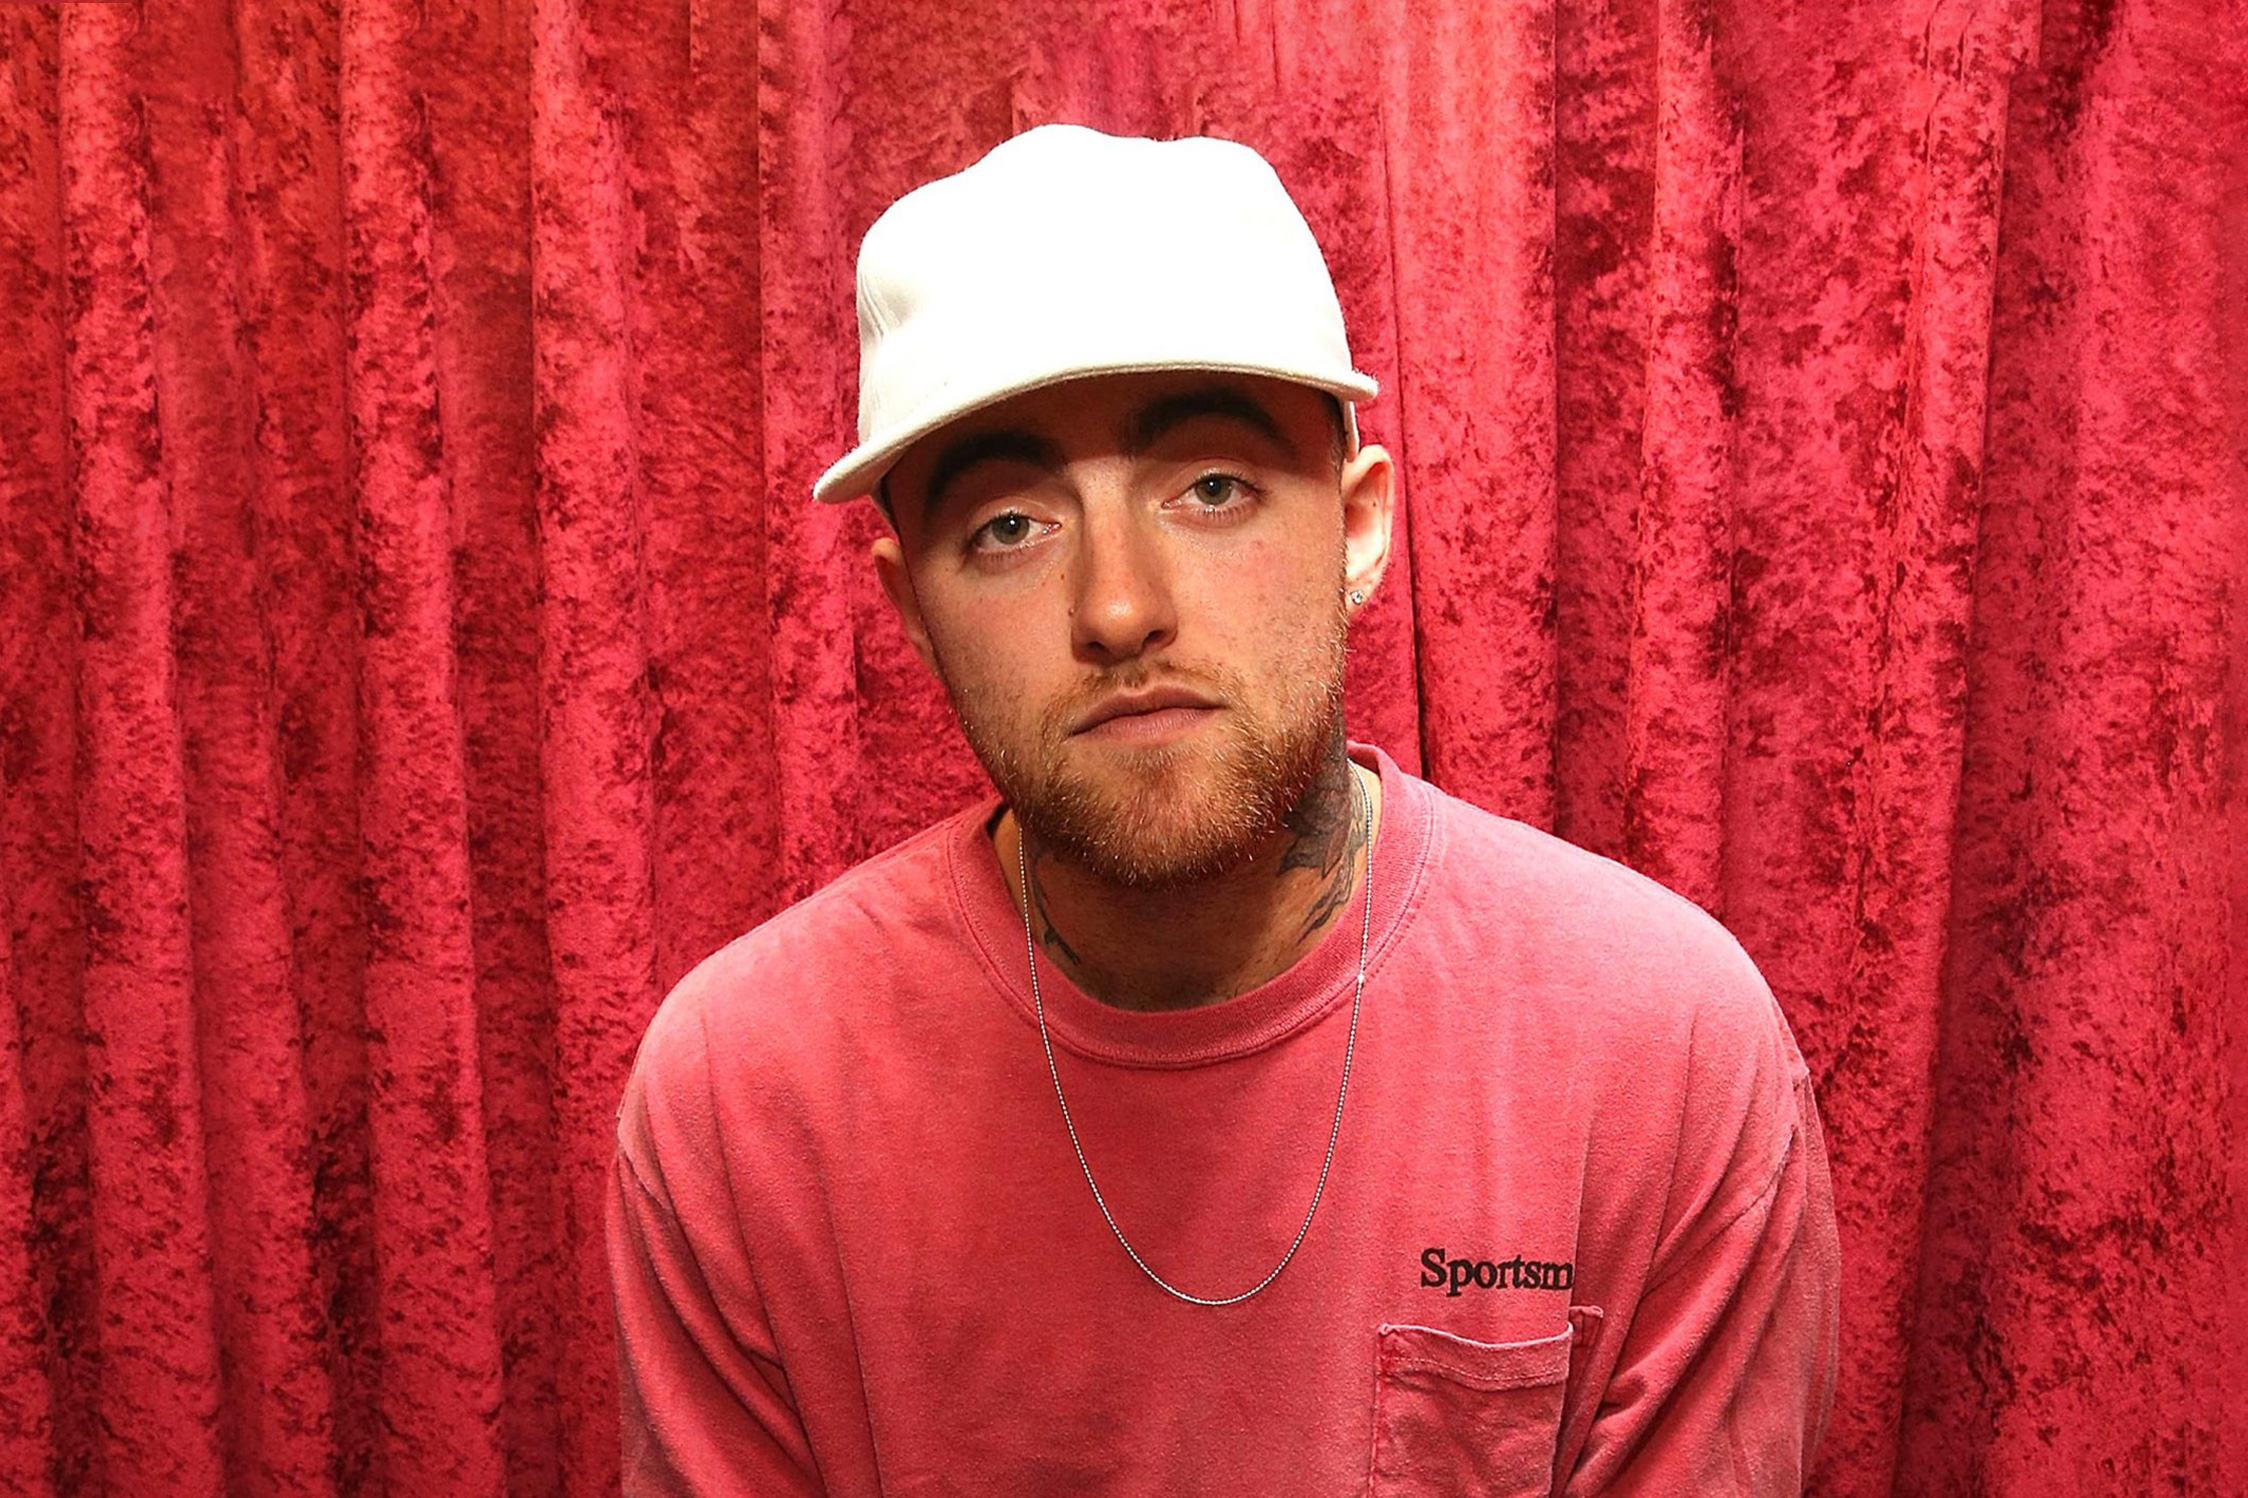 The Man Whose Fentanyl Distribution Was Connected to Mac Miller's Deat...